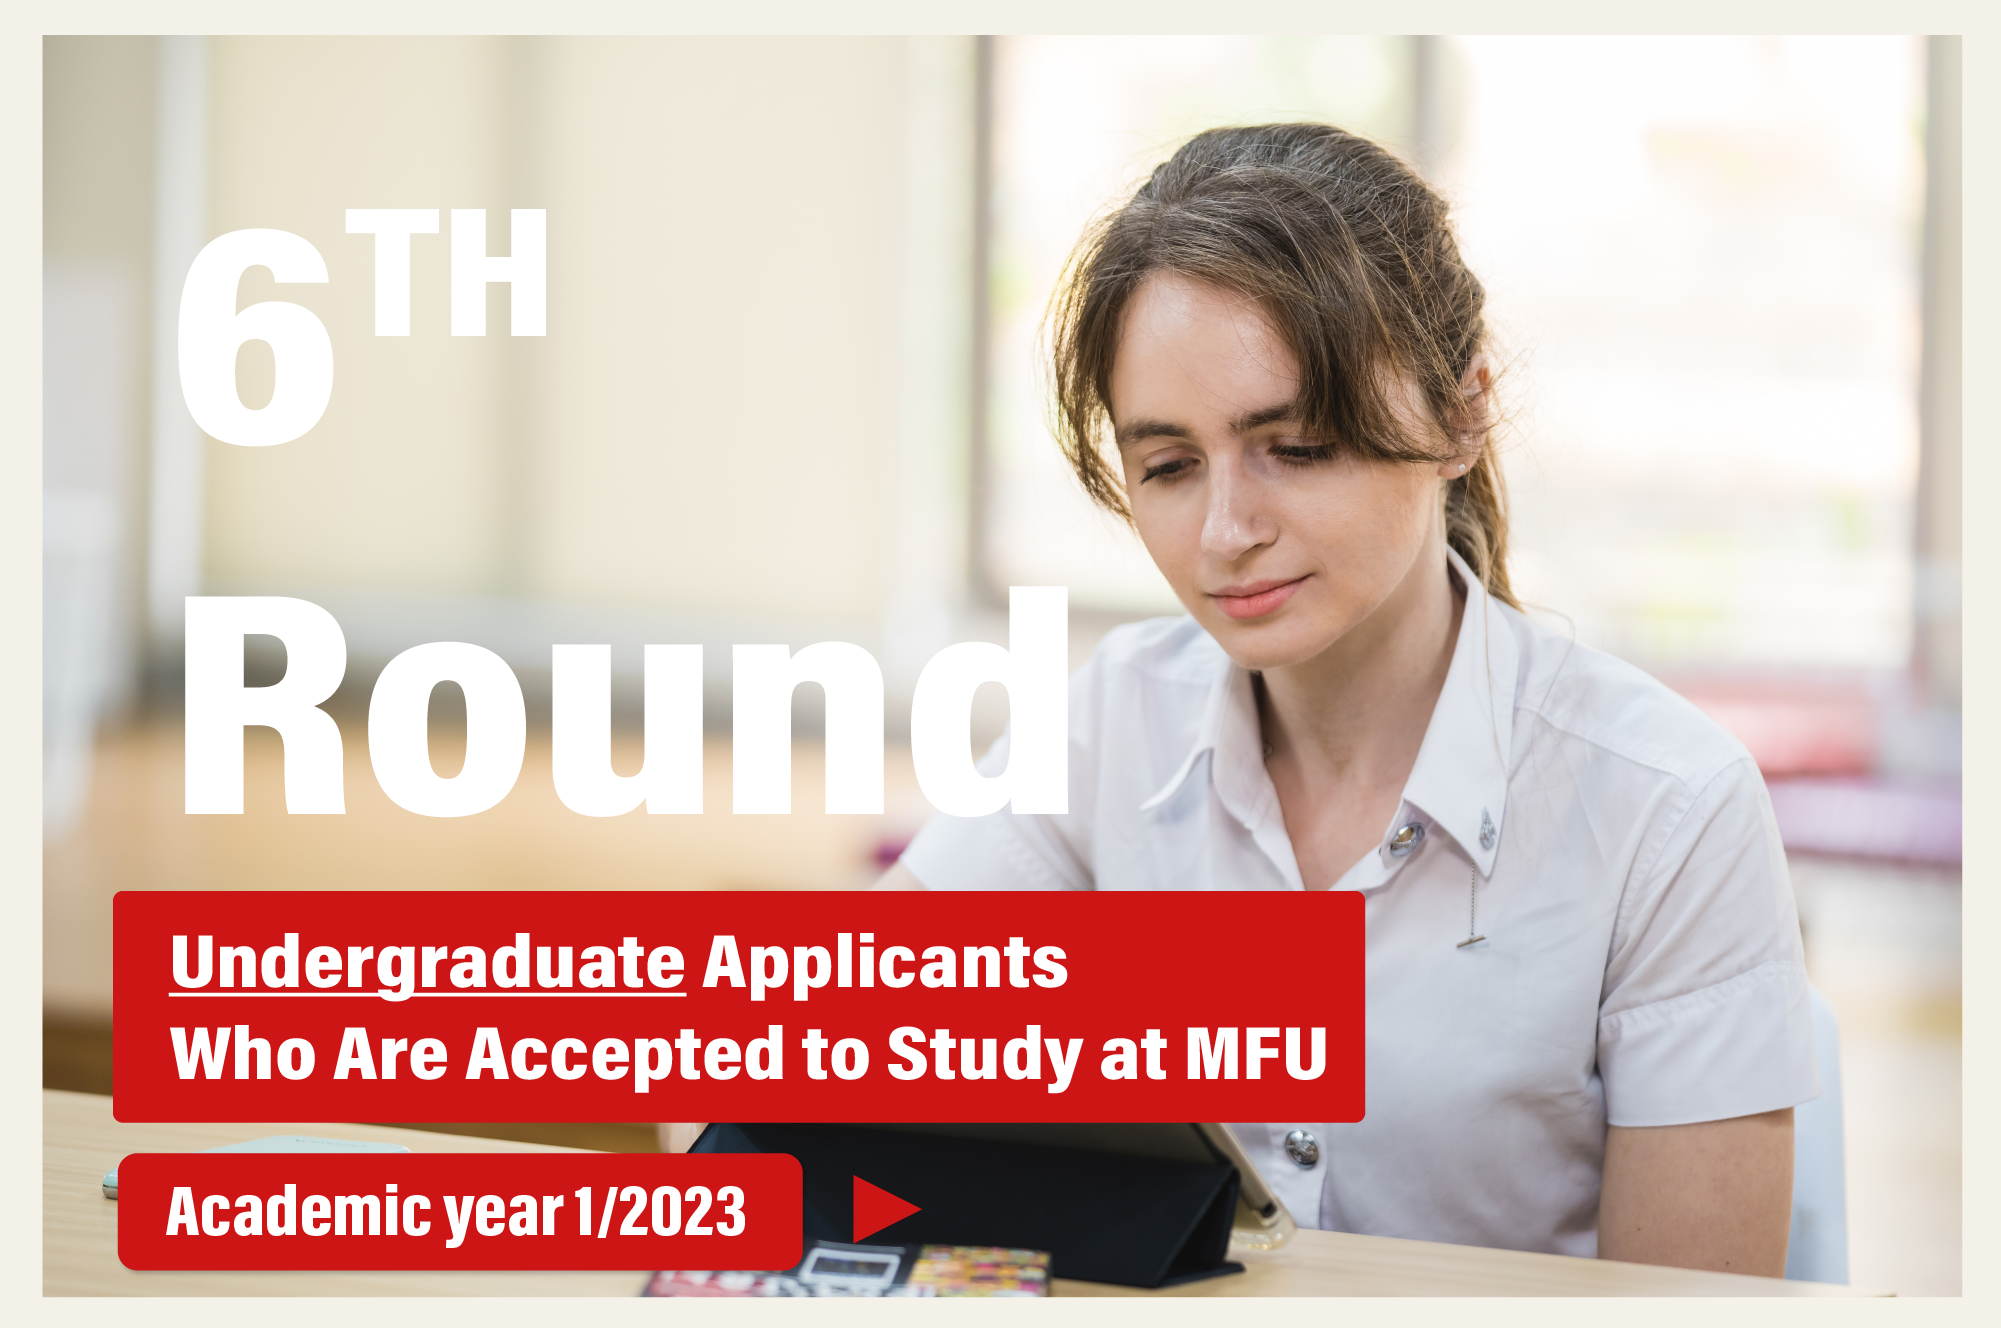 Announcement of the 6th-Round Undergraduate Applicants Who Are Accepted to Study at MFU